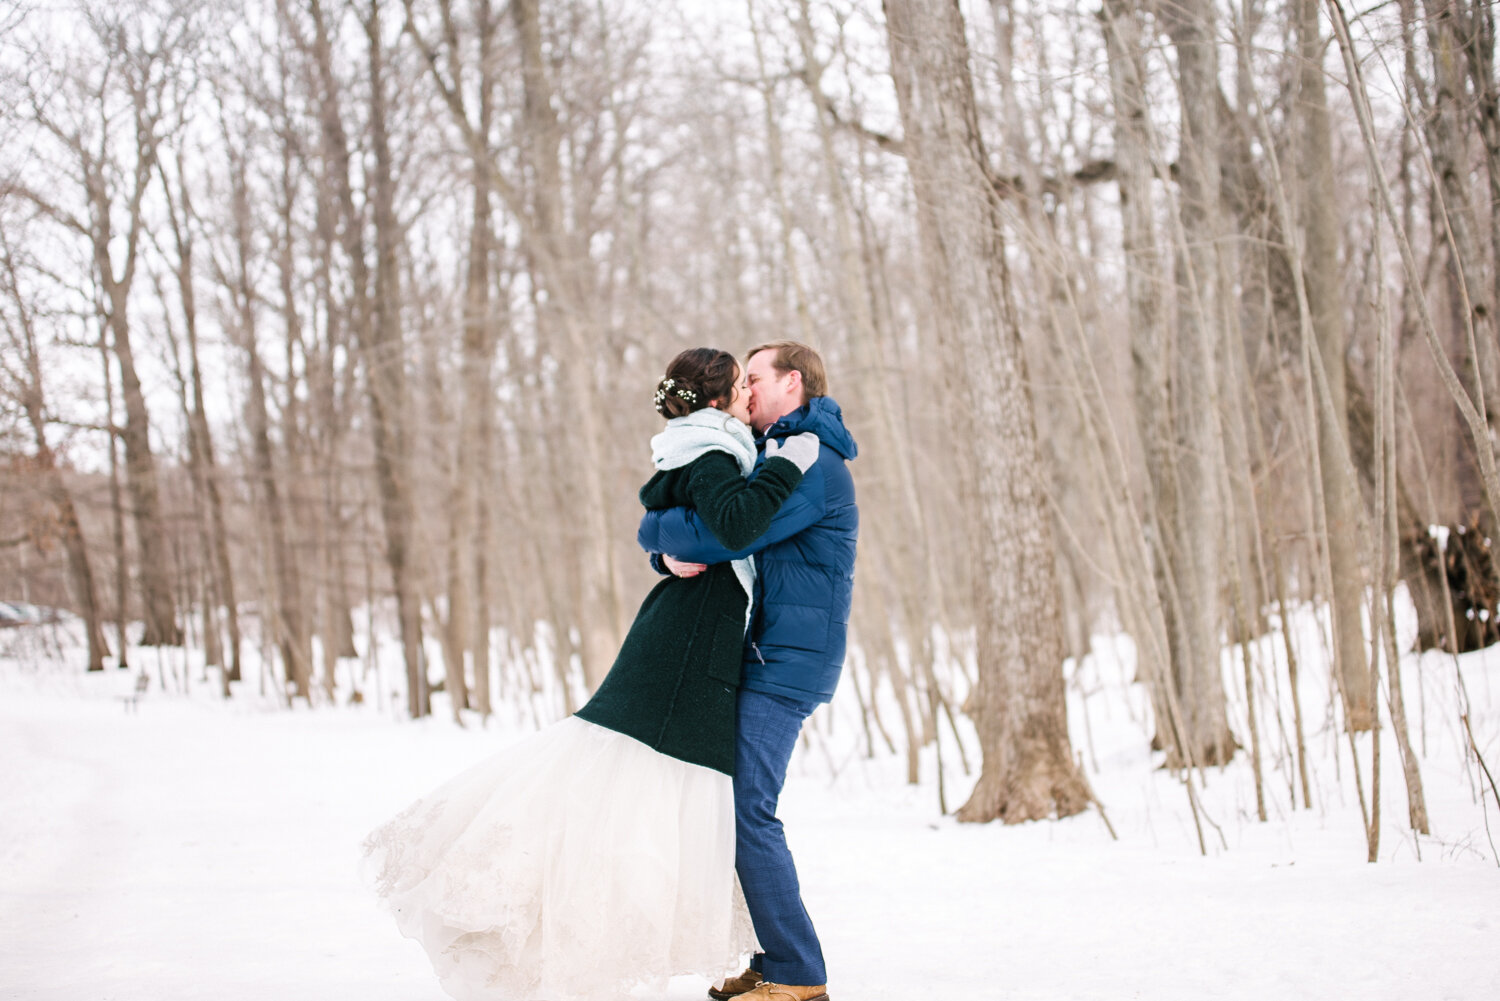  I fell in love with Sara and Iain’s winter wedding! It was my first Canadian winter photoshoot and it was epic! 